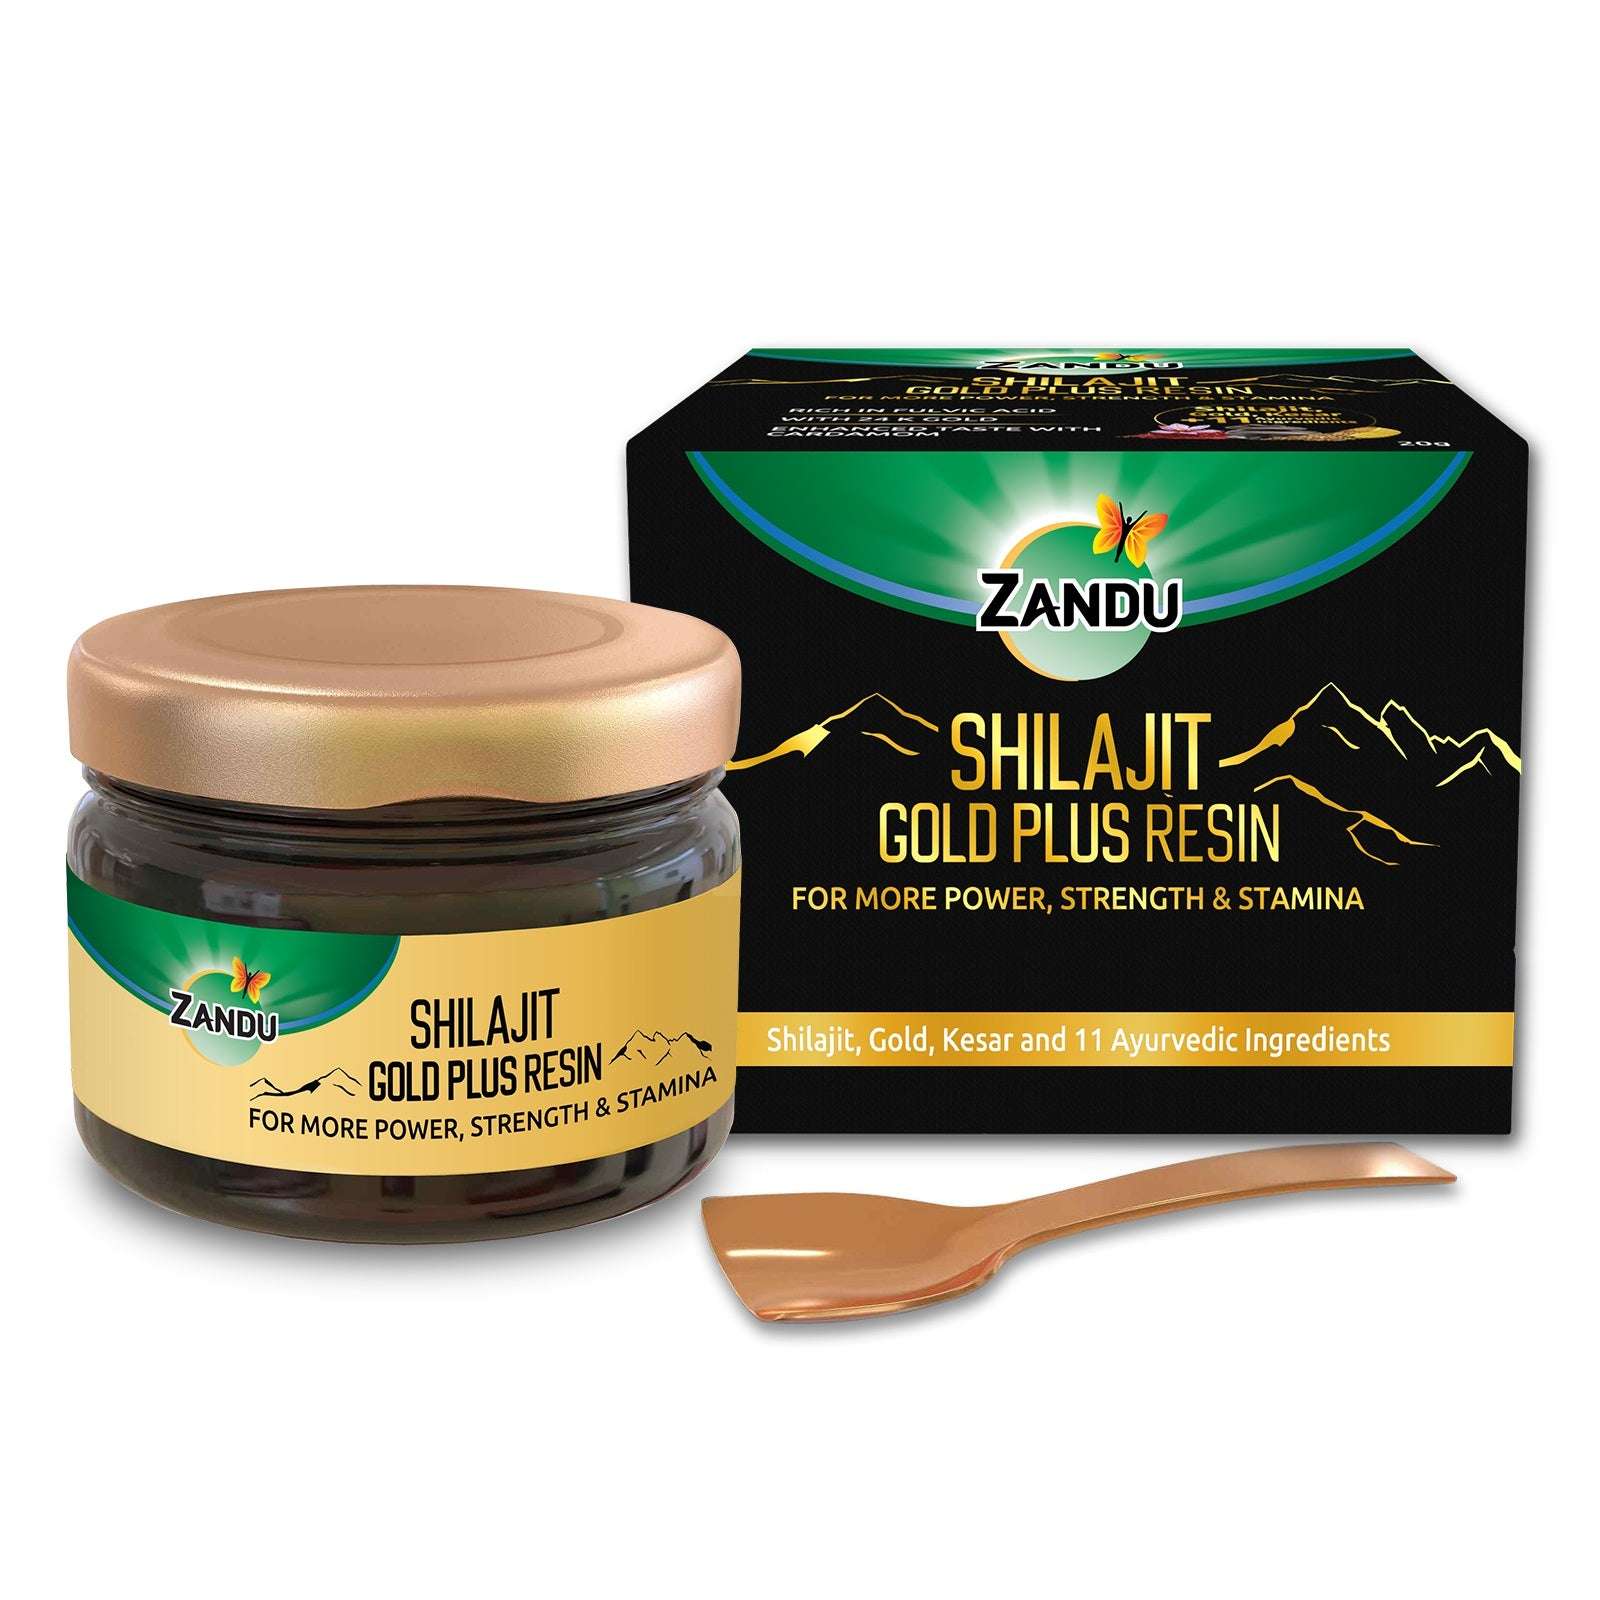 Pure Shilajit Gold Plus Resin for All-Day Power, Energy & Strength